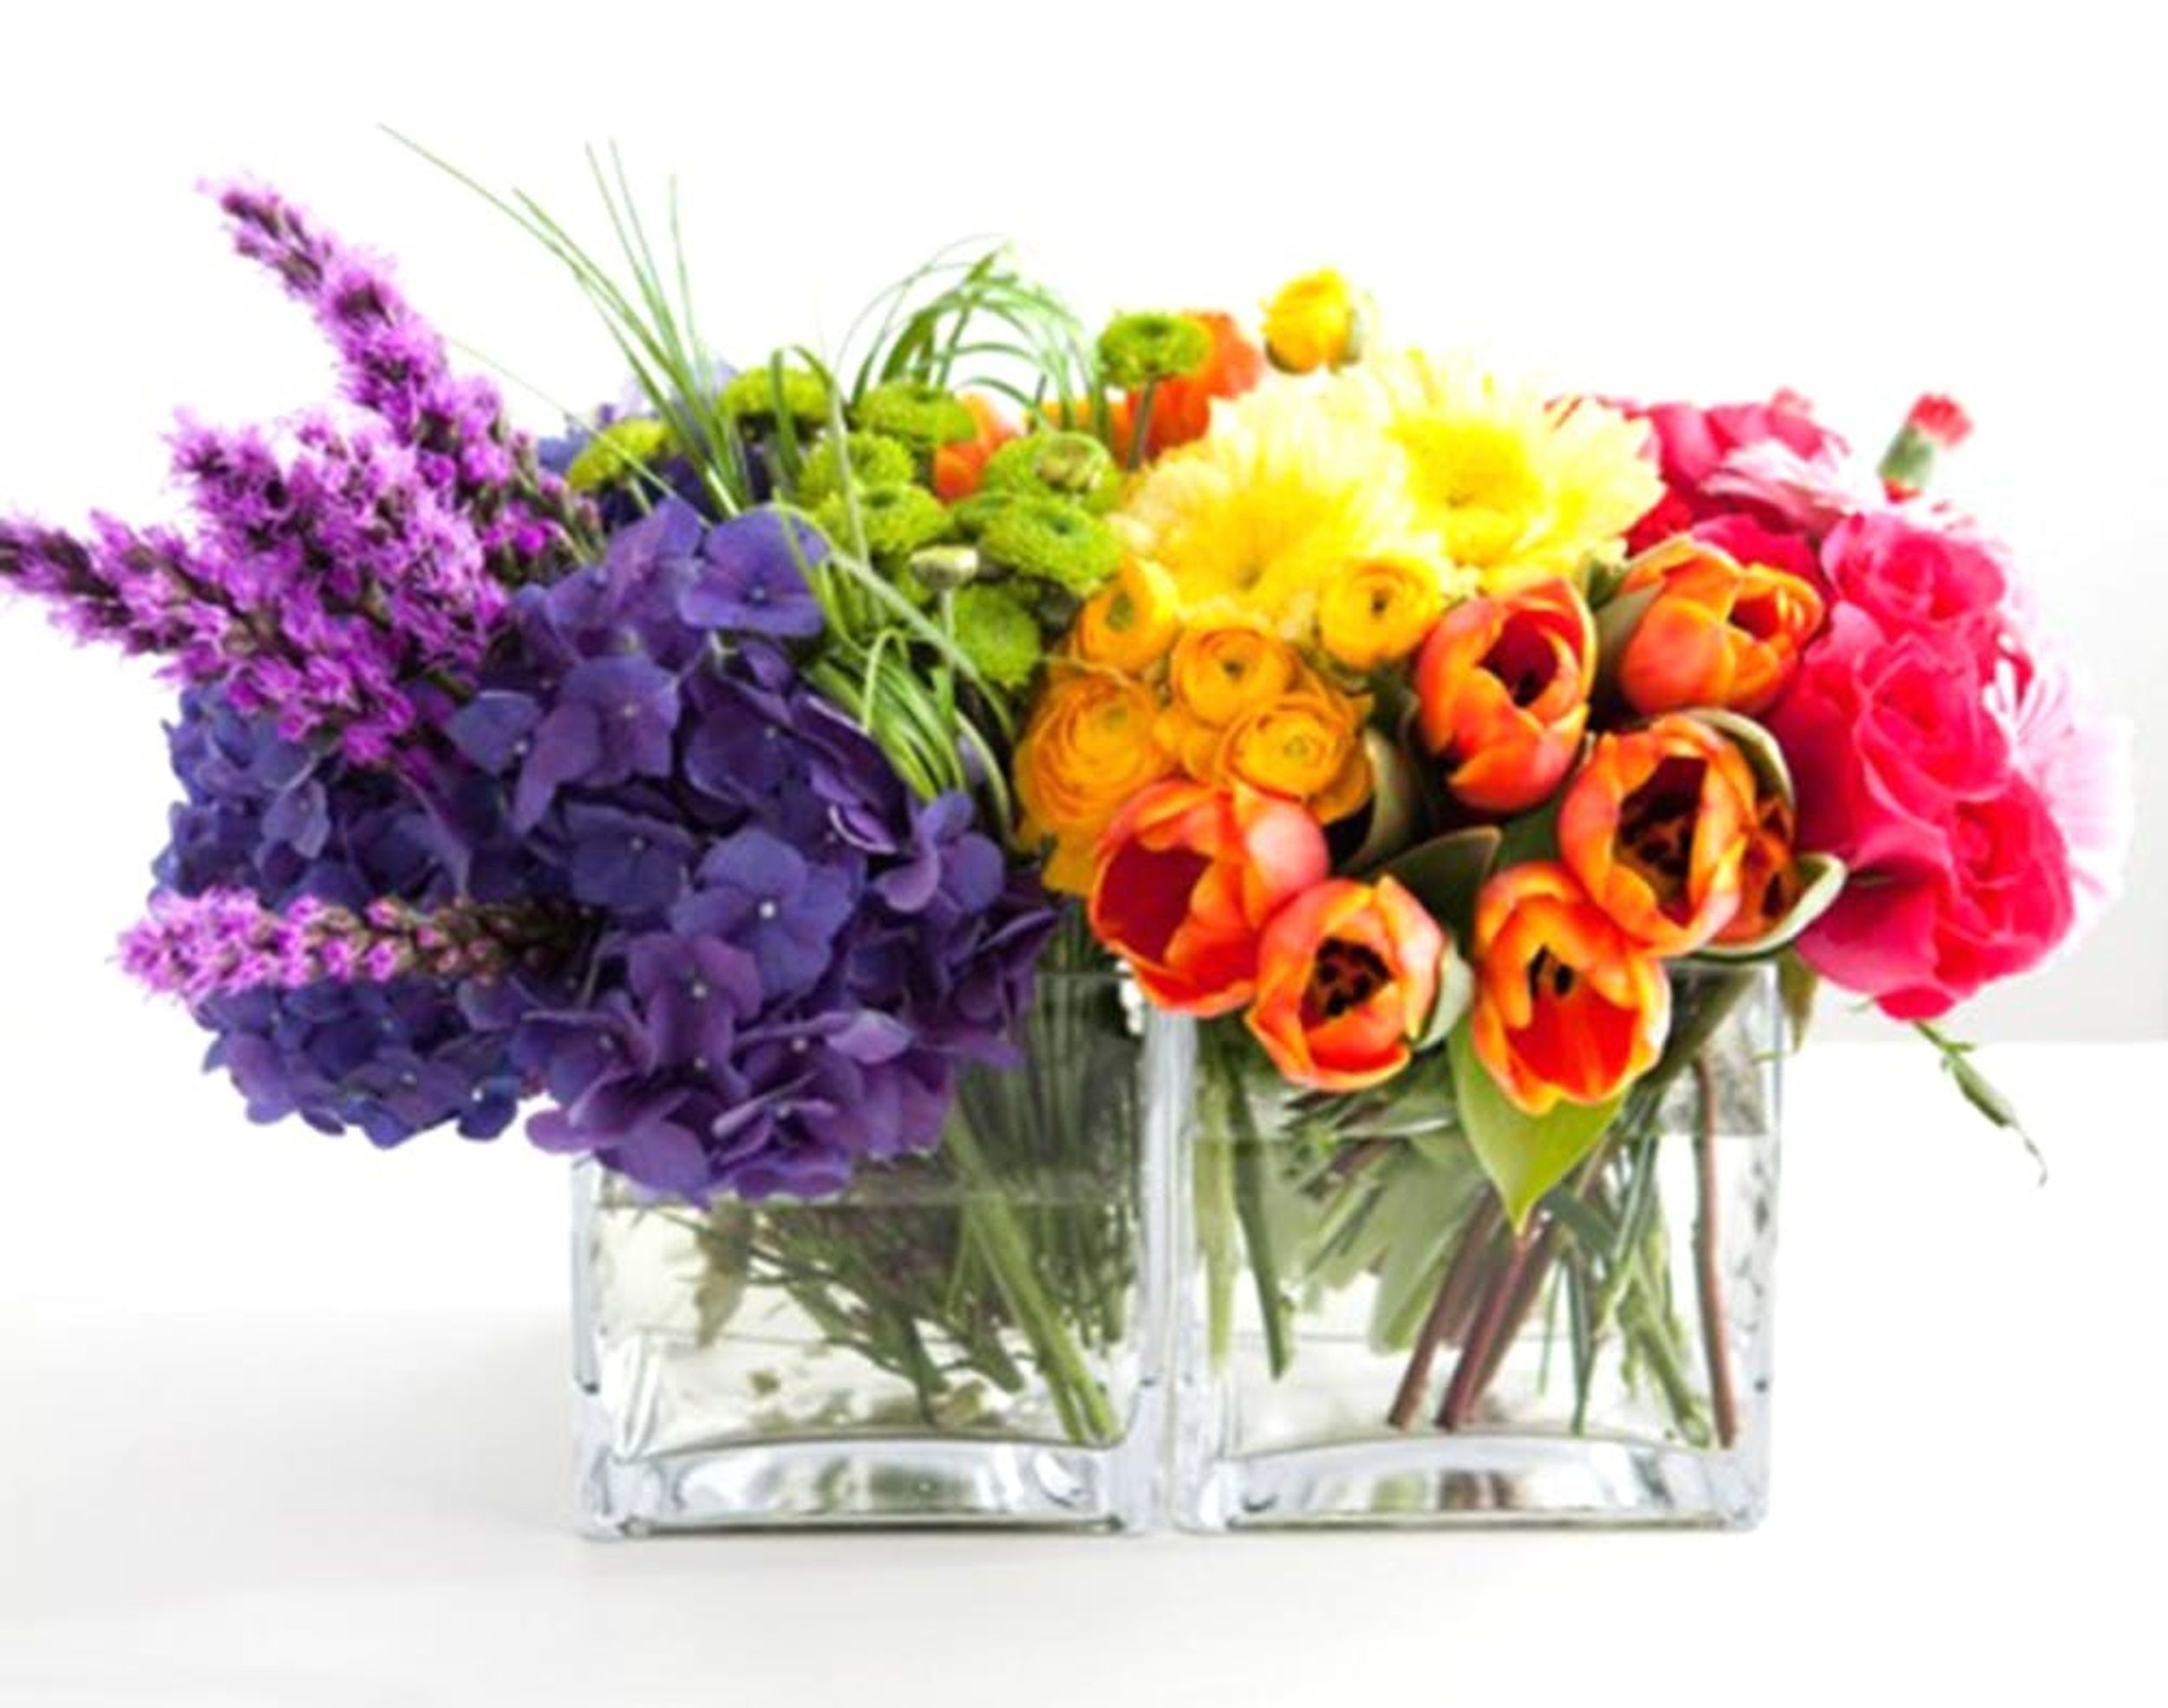 20 Fab Floral Arrangements to Make for Your Next Event